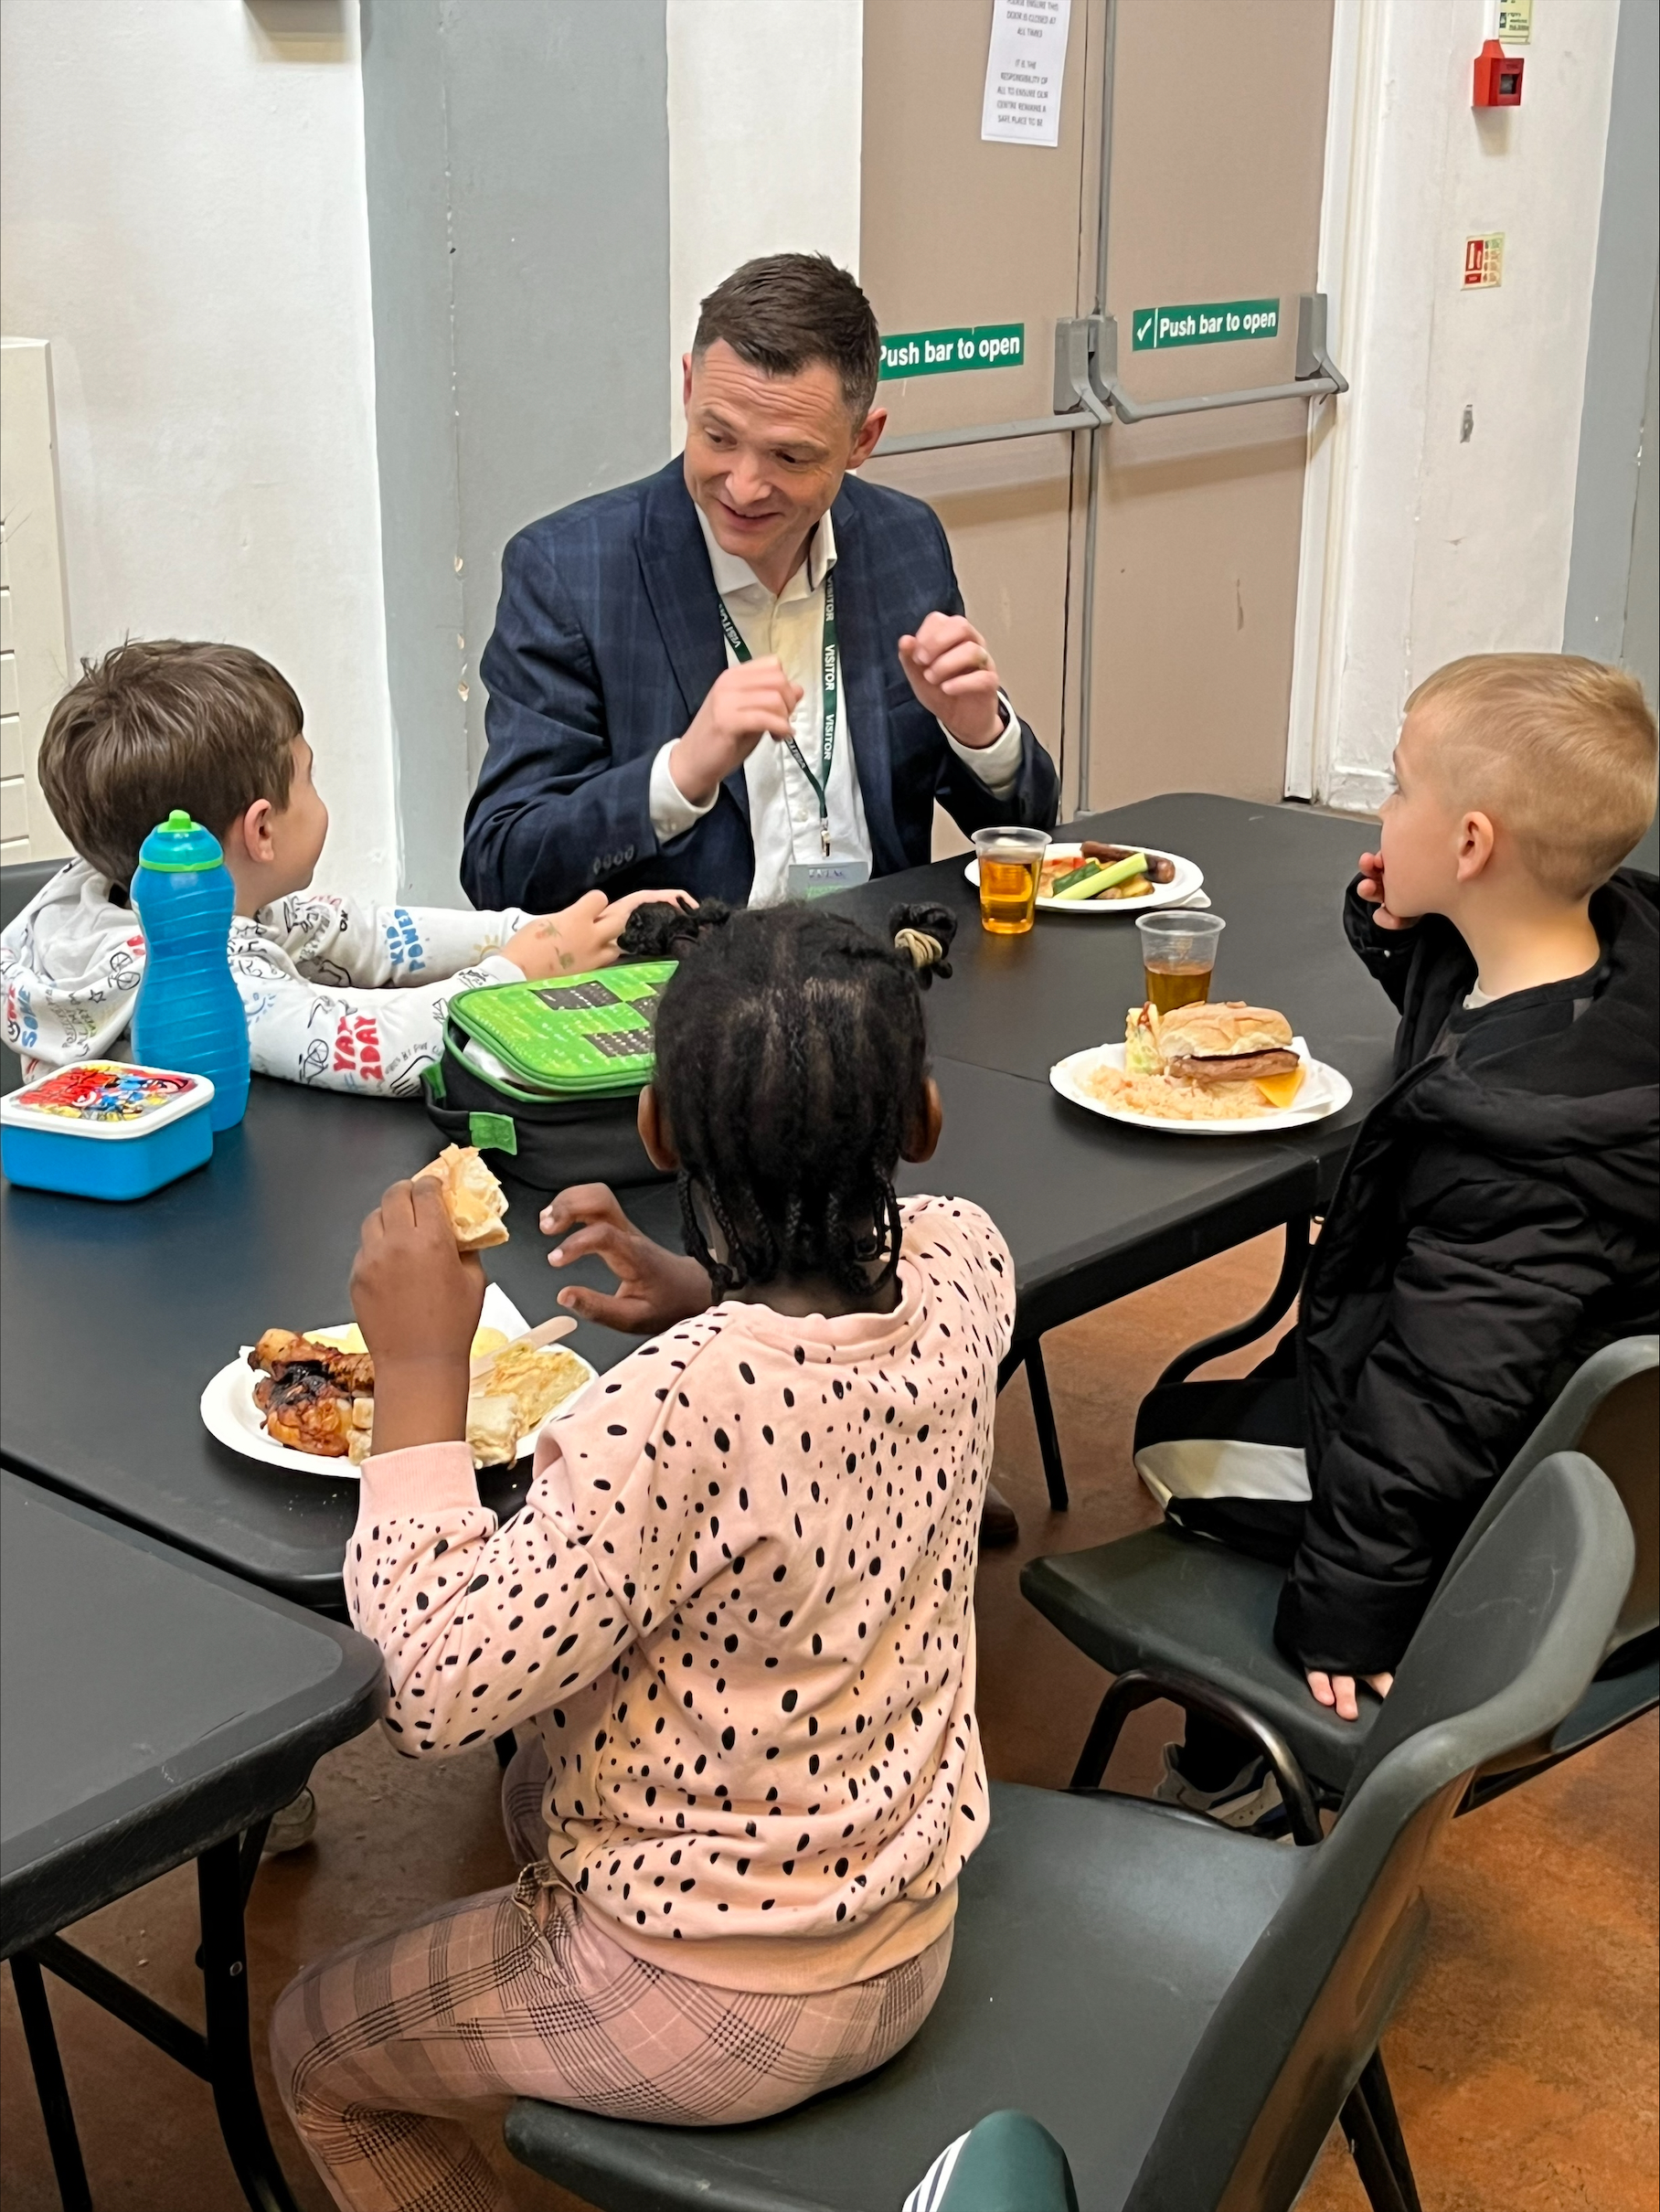 Our interim Chief Exec @ColinHansellE13 joined young people for lunch at @e16rdlac today. Brilliant to see our children and young people enjoying activities during the Easter break - LINK